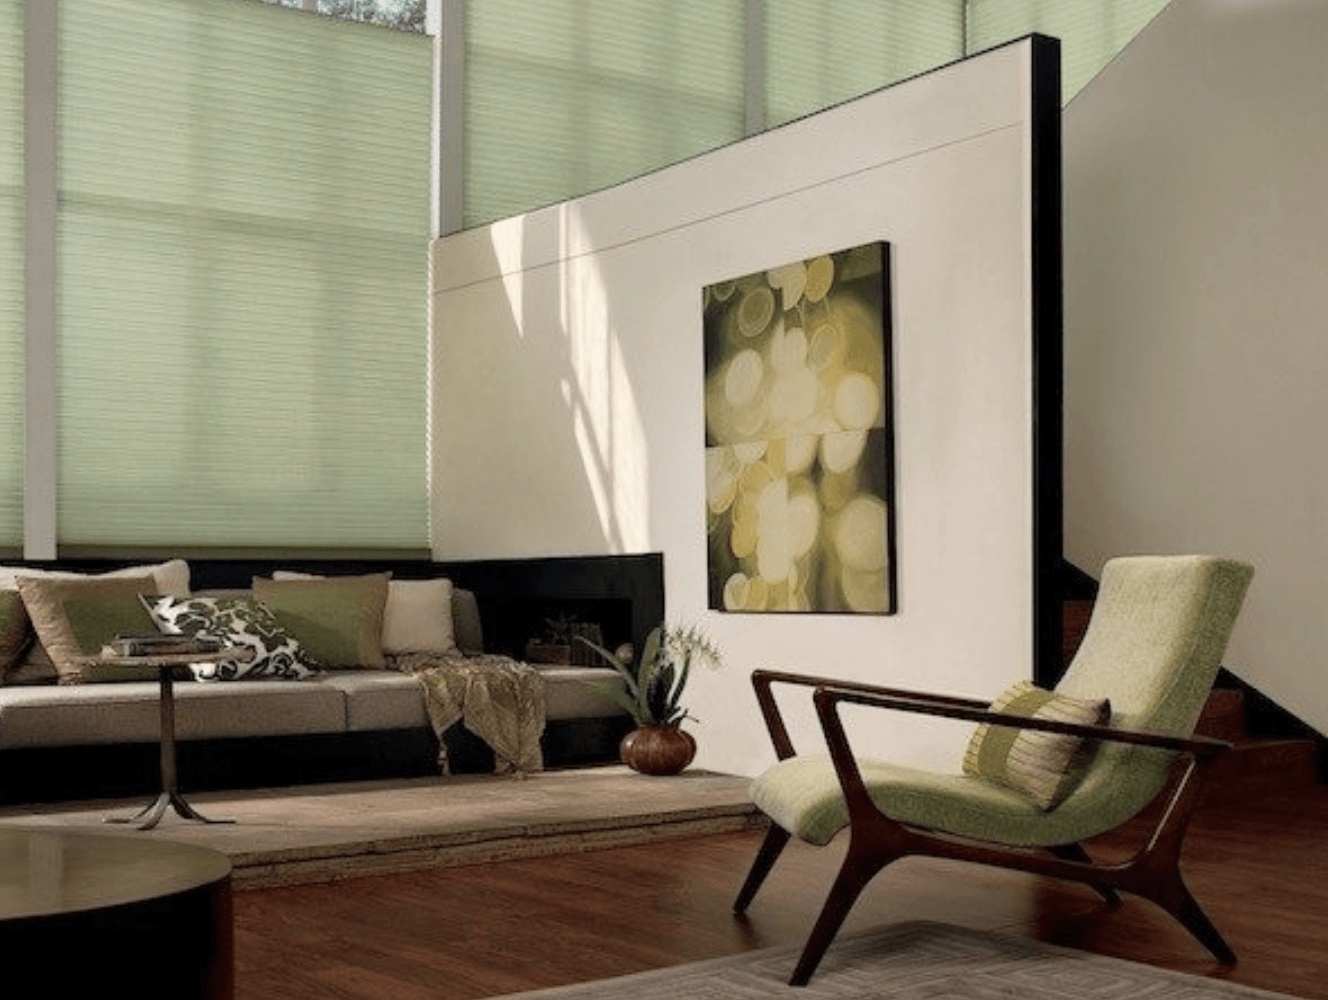 Muted green window shades and home accents create a peaceful feeling in this living room.